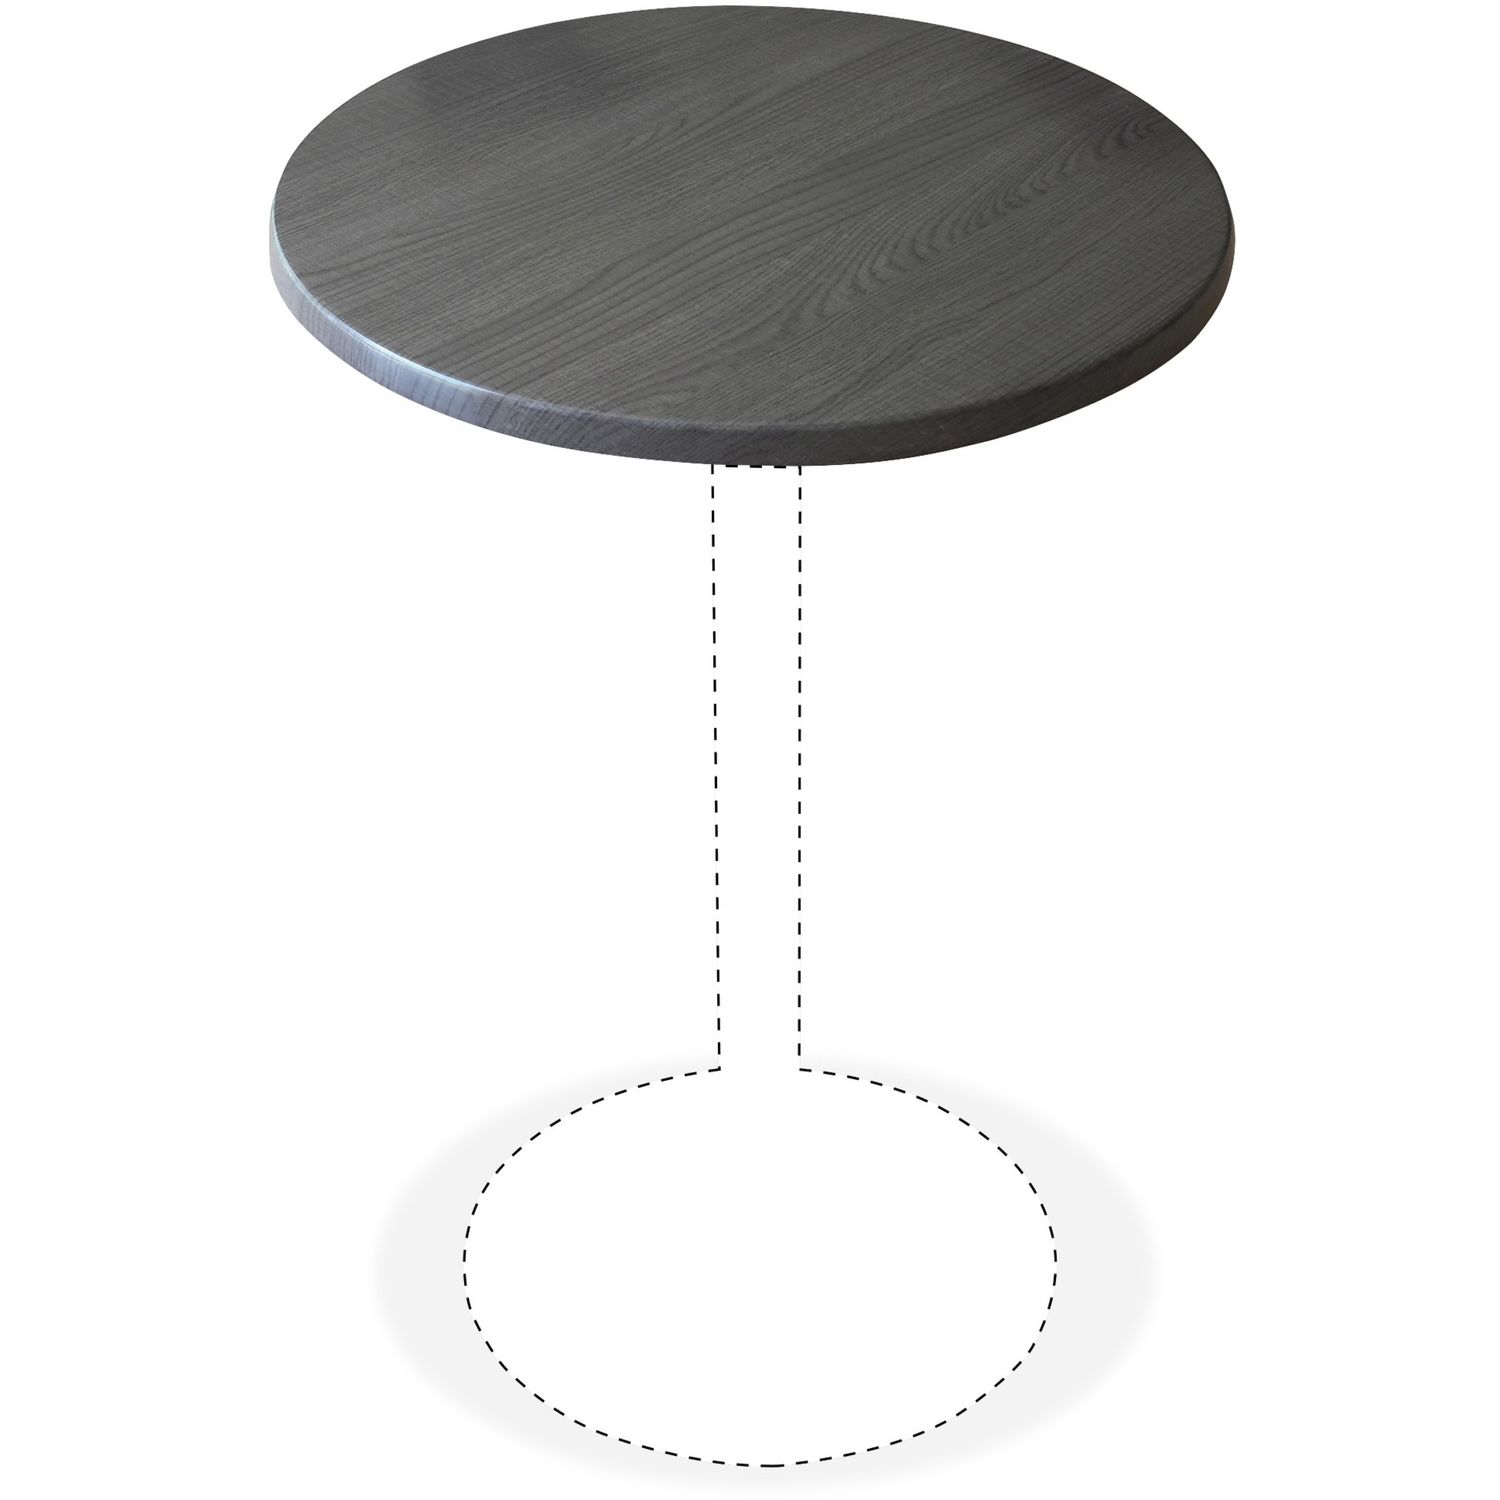 Utility Table Top Charcoal Round Top x 30" Table Top Diameter